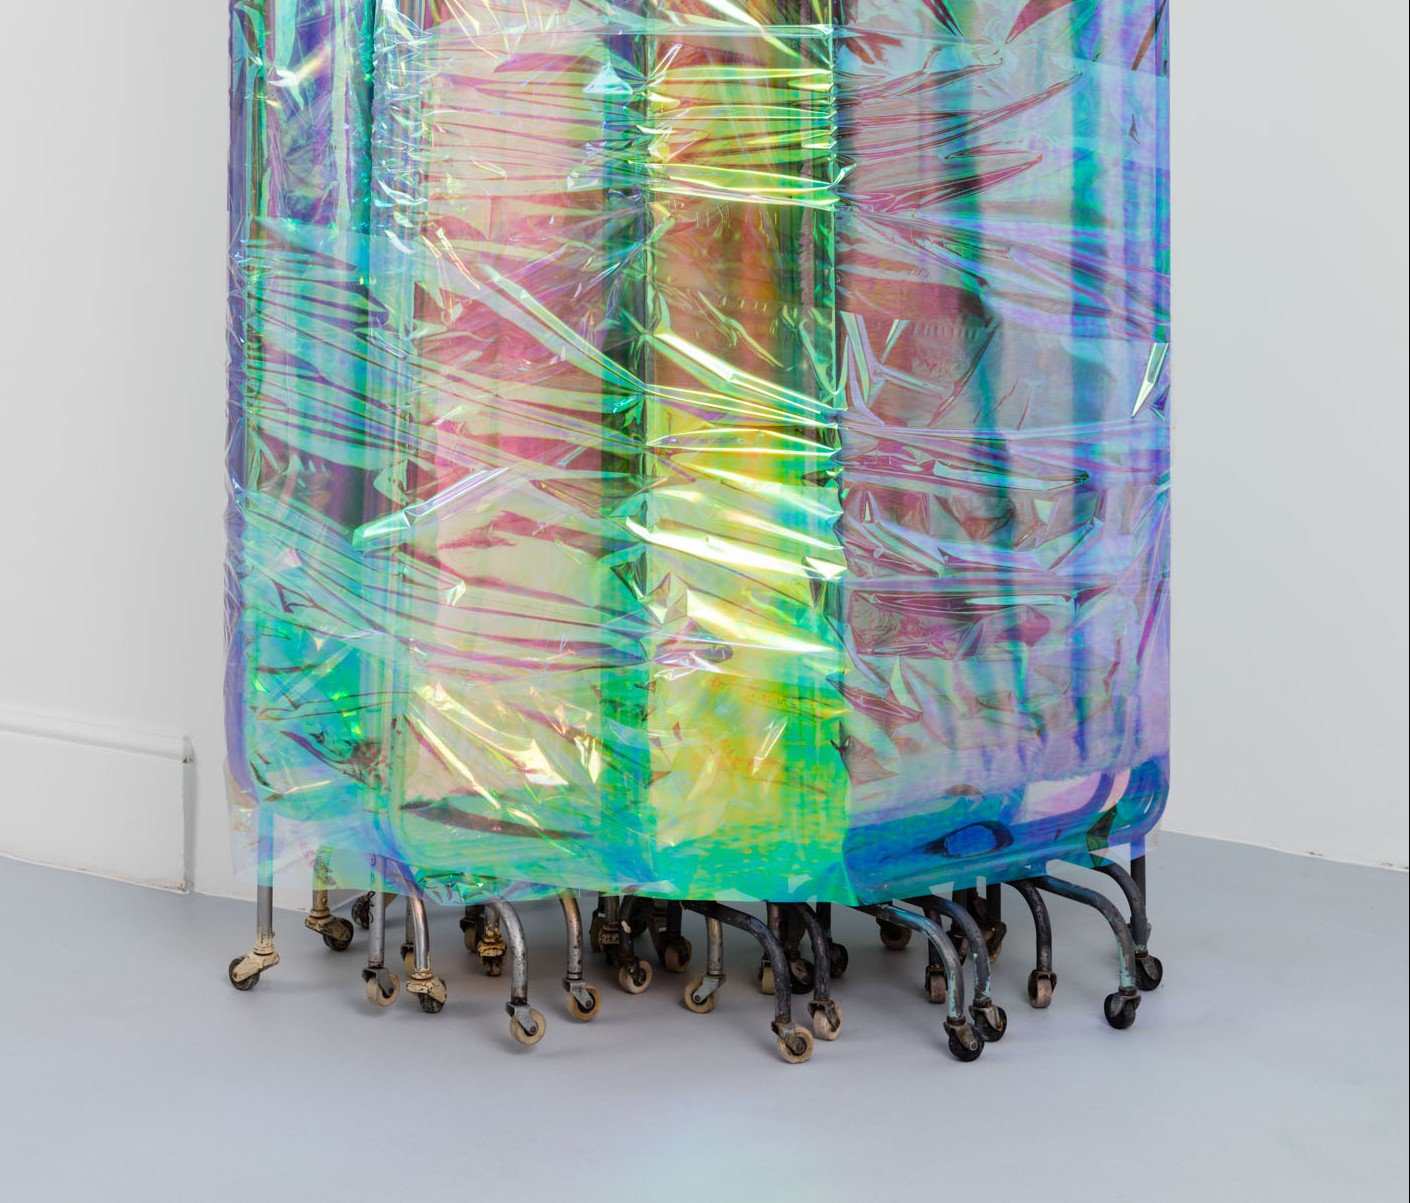 Ian Law, There was a body, I was there, was a body, detail, medical privacy screens with soft toy fur fabric and curtain netting, gift wrapped, 171 x 108 cm, 2015